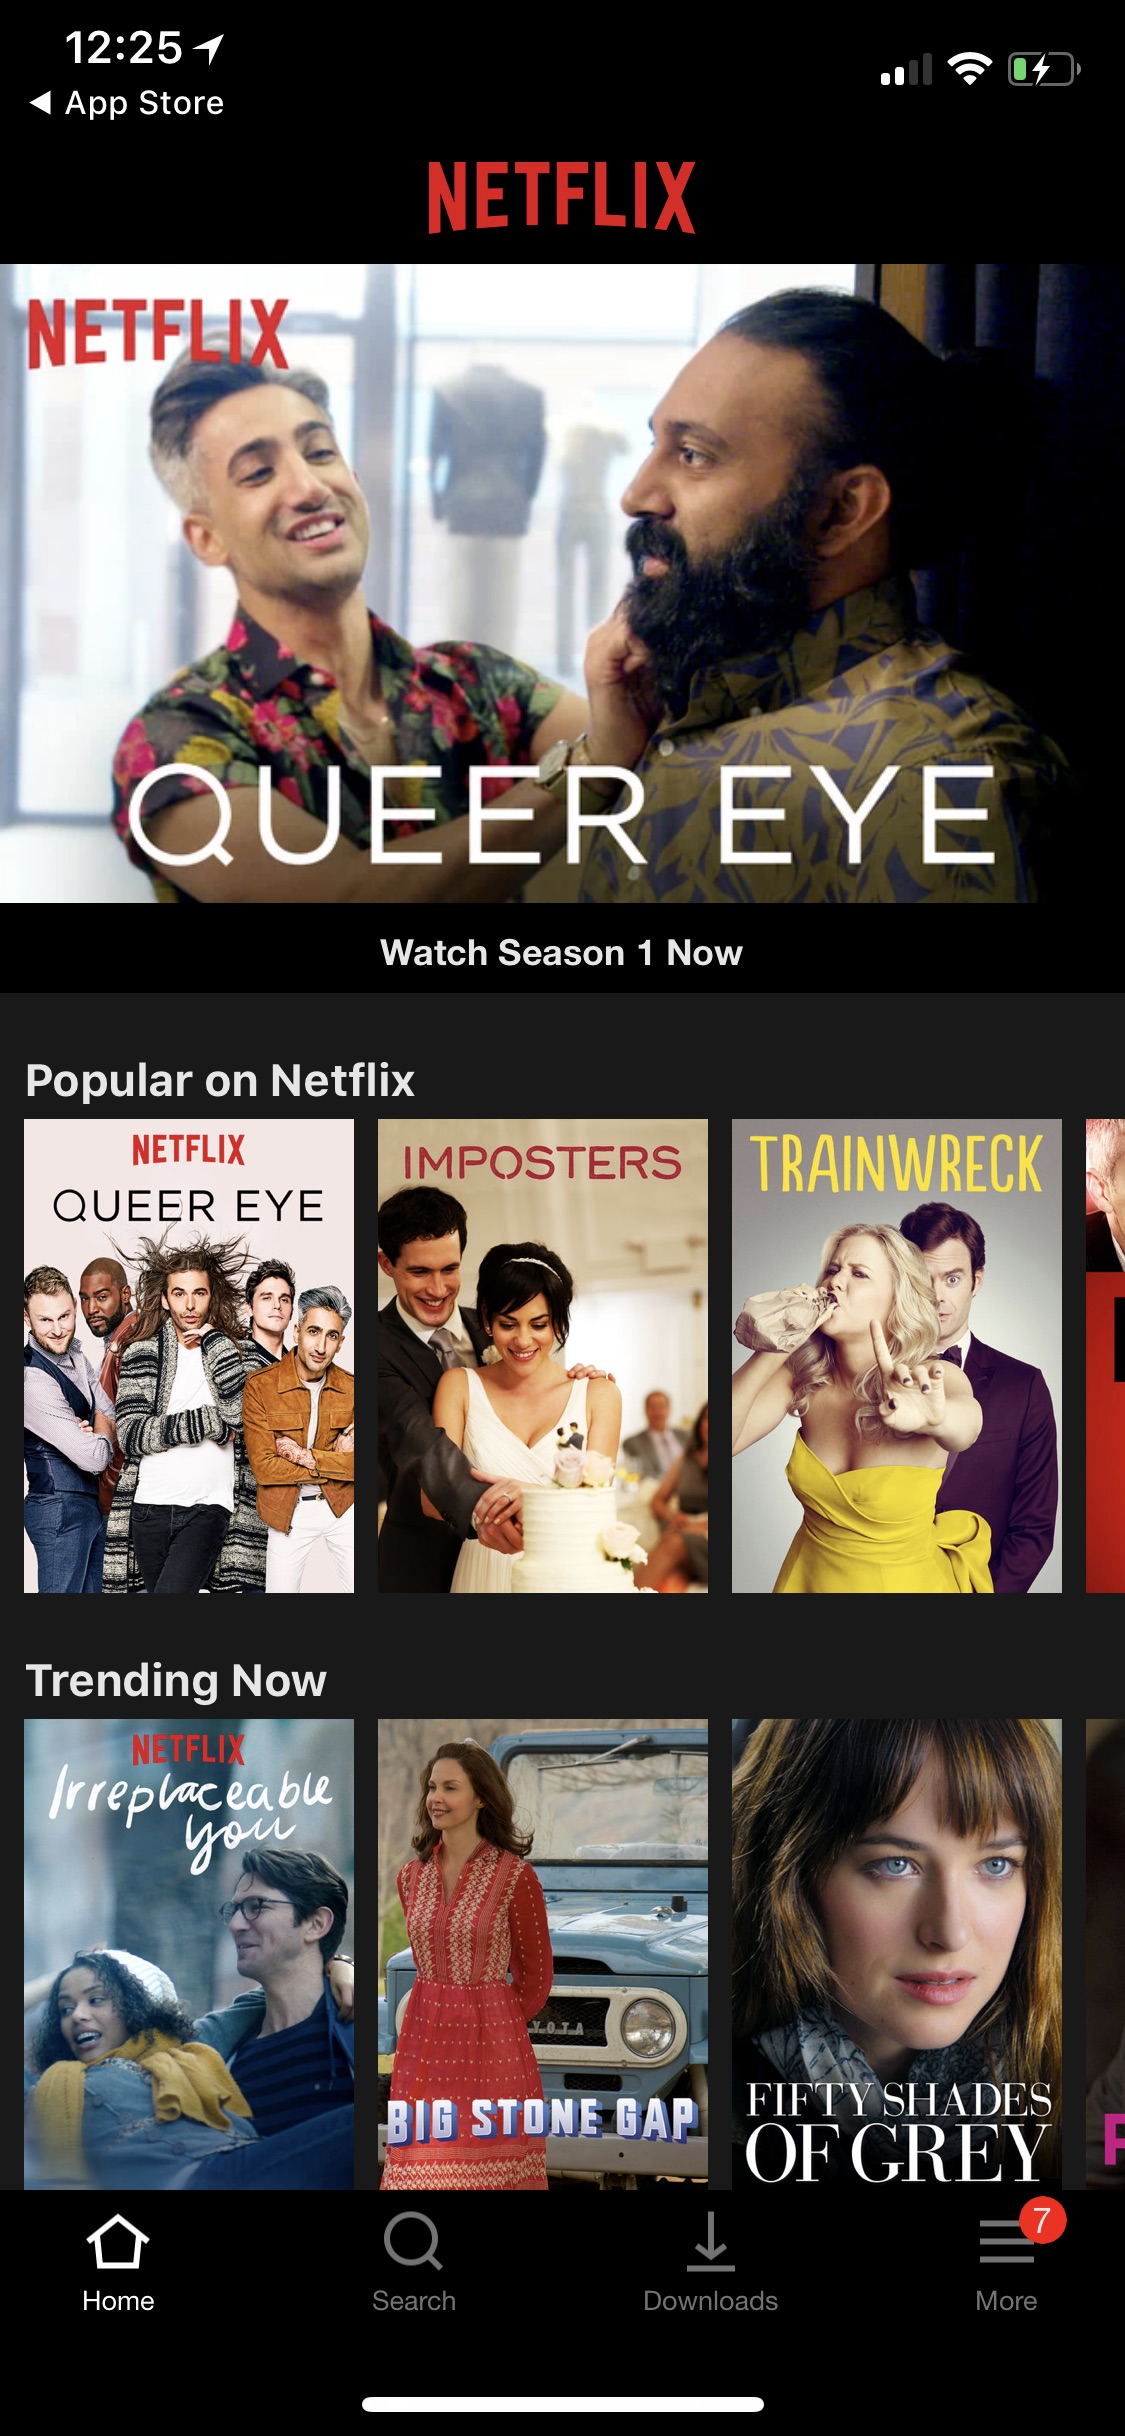 Netflix Rolls Out New App Design With Tab Bar